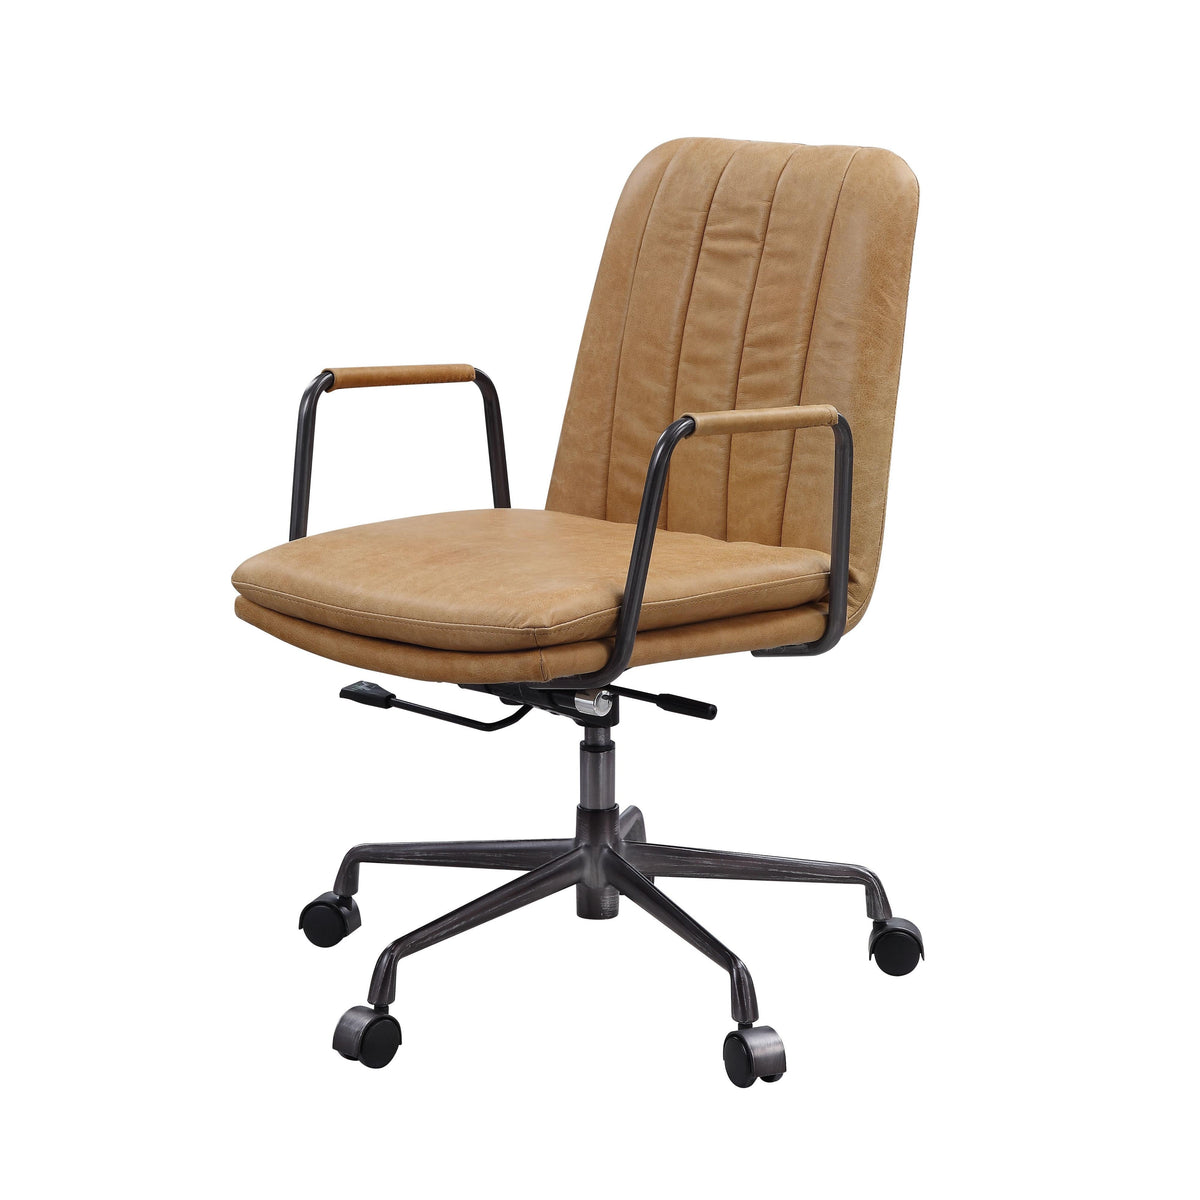 Acme Furniture Eclarn 93174 Office Chair